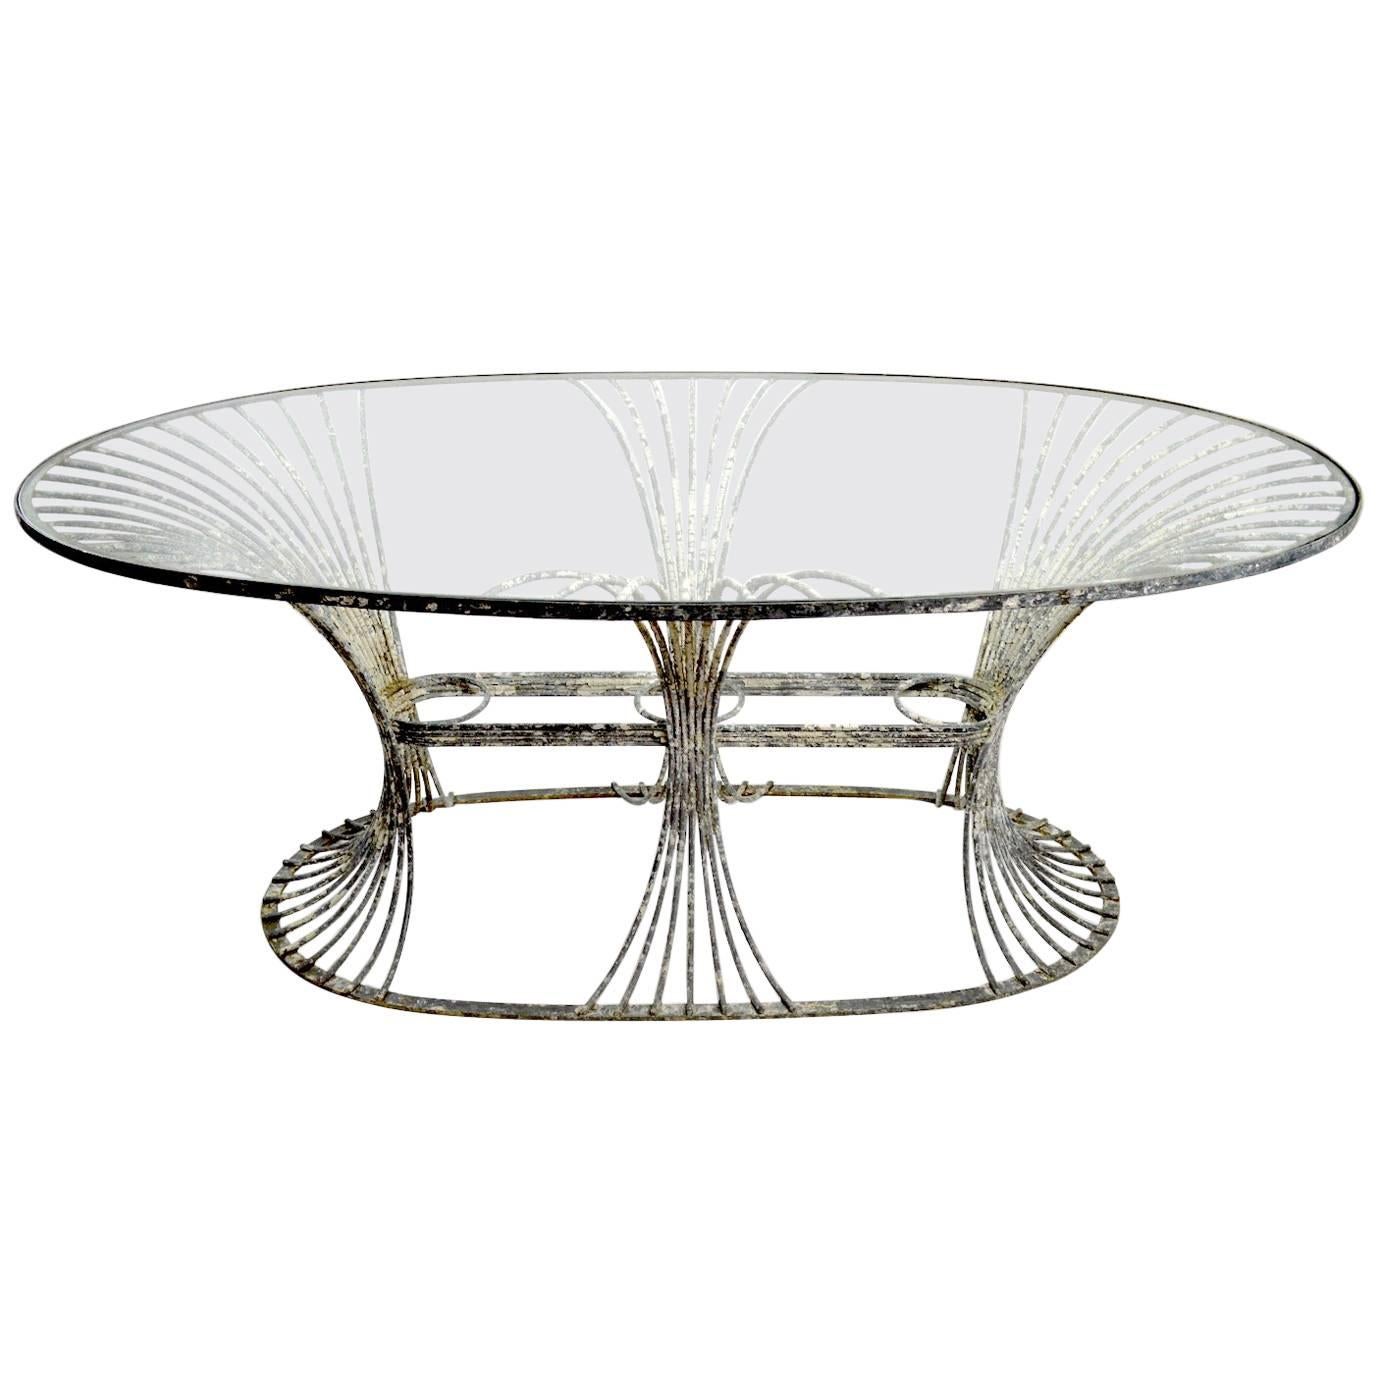 Rare Art Deco Garden Table by Leinfelder in Zinc and Glass For Sale